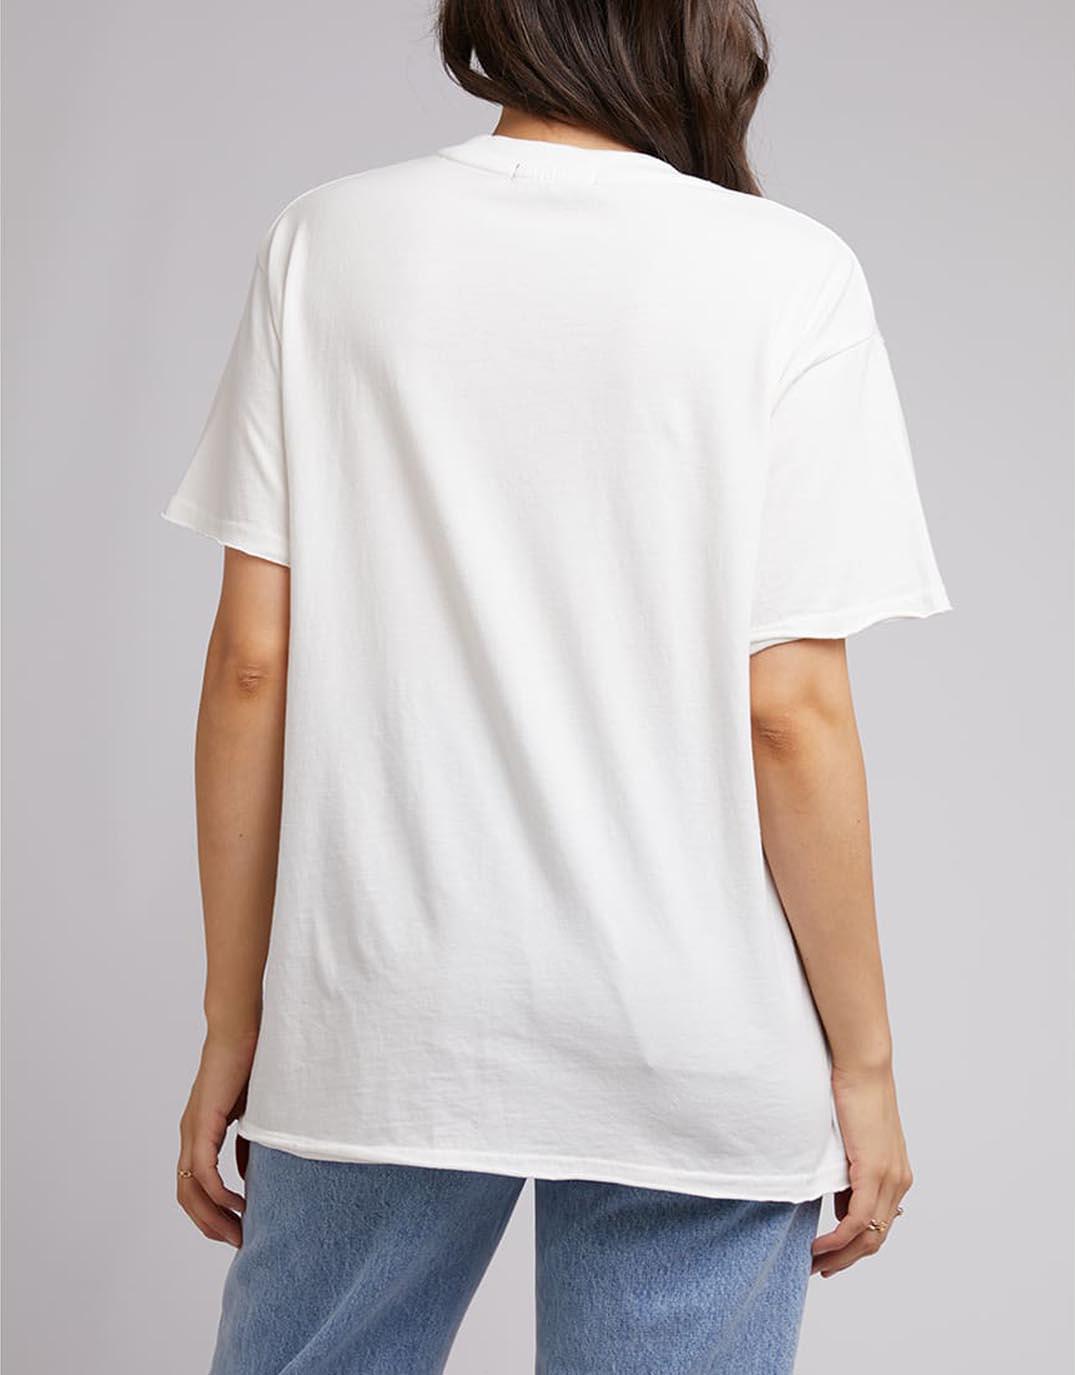 All About Eve - Brooks Tee - Vintage White - White & Co Living Tees & Tanks